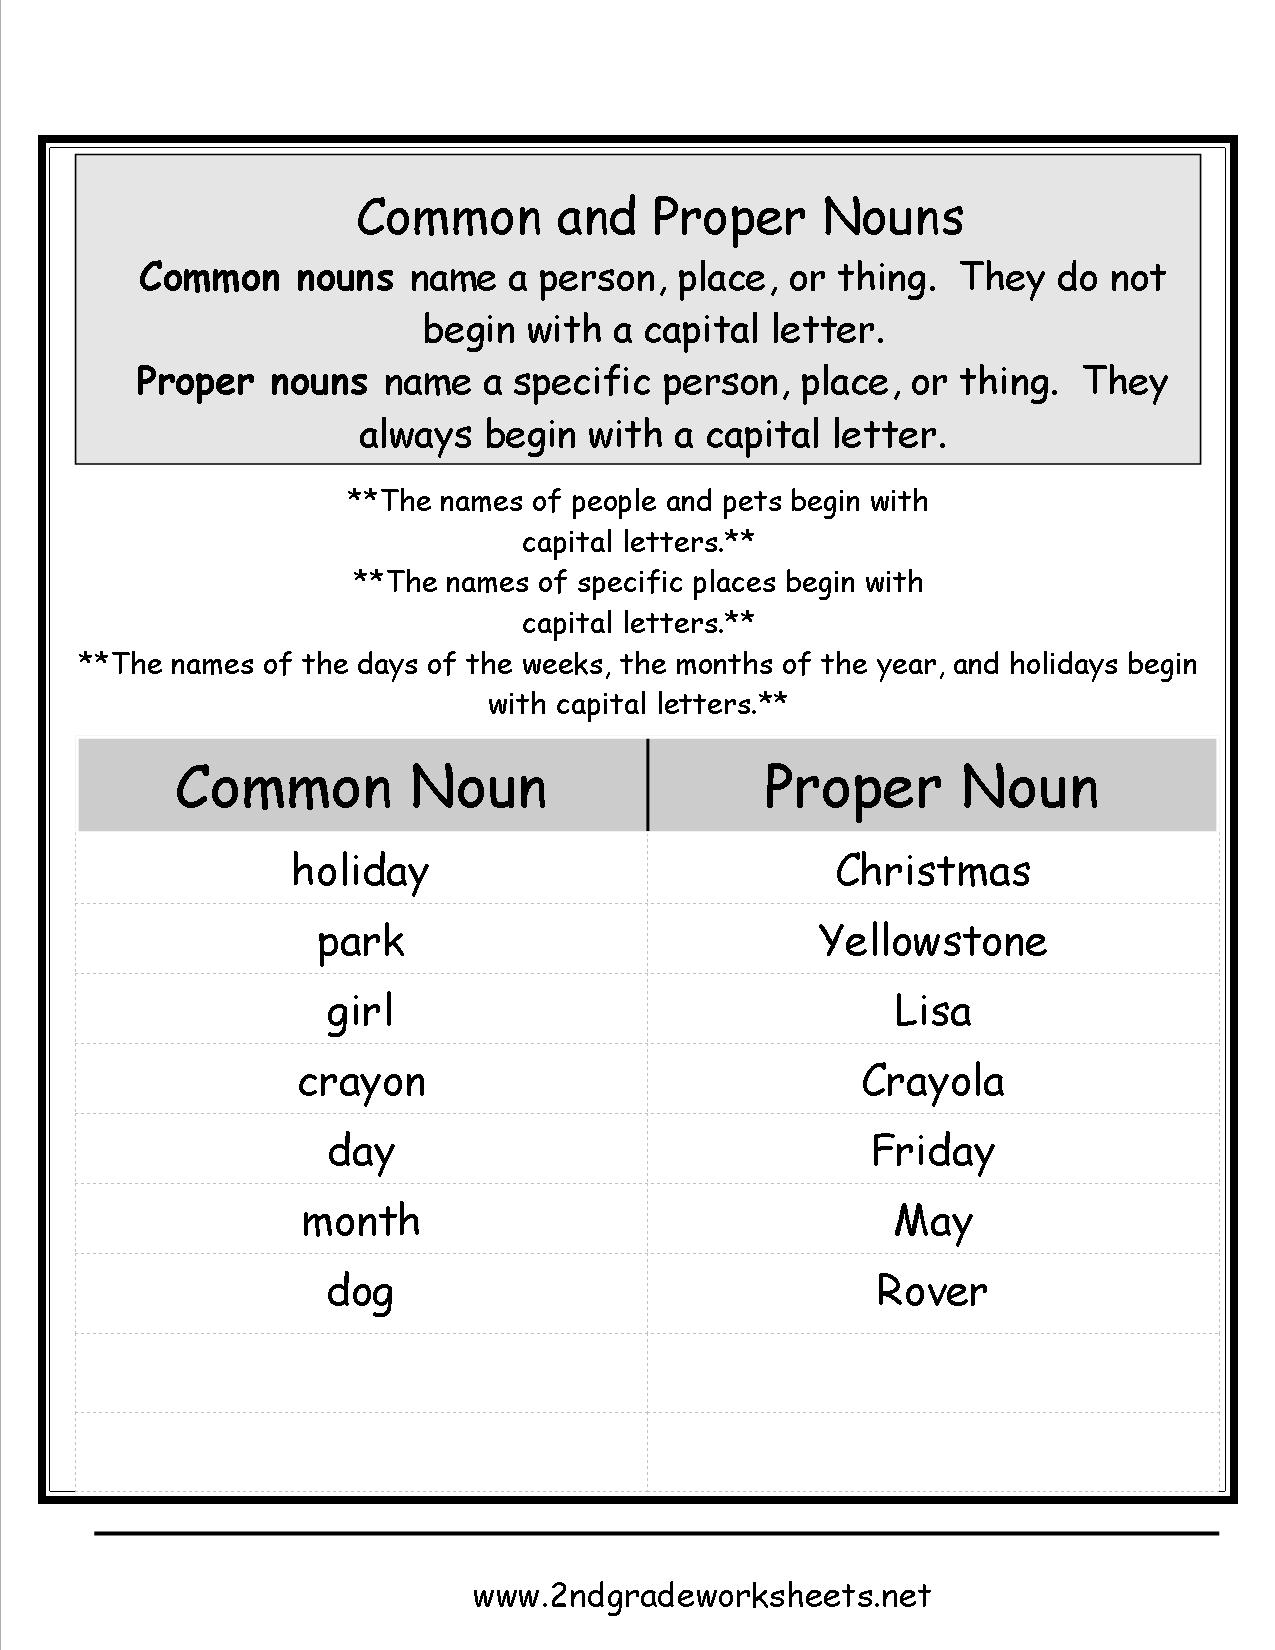 16-best-images-of-6th-grade-sentence-structure-worksheets-grade-6-common-and-proper-nouns